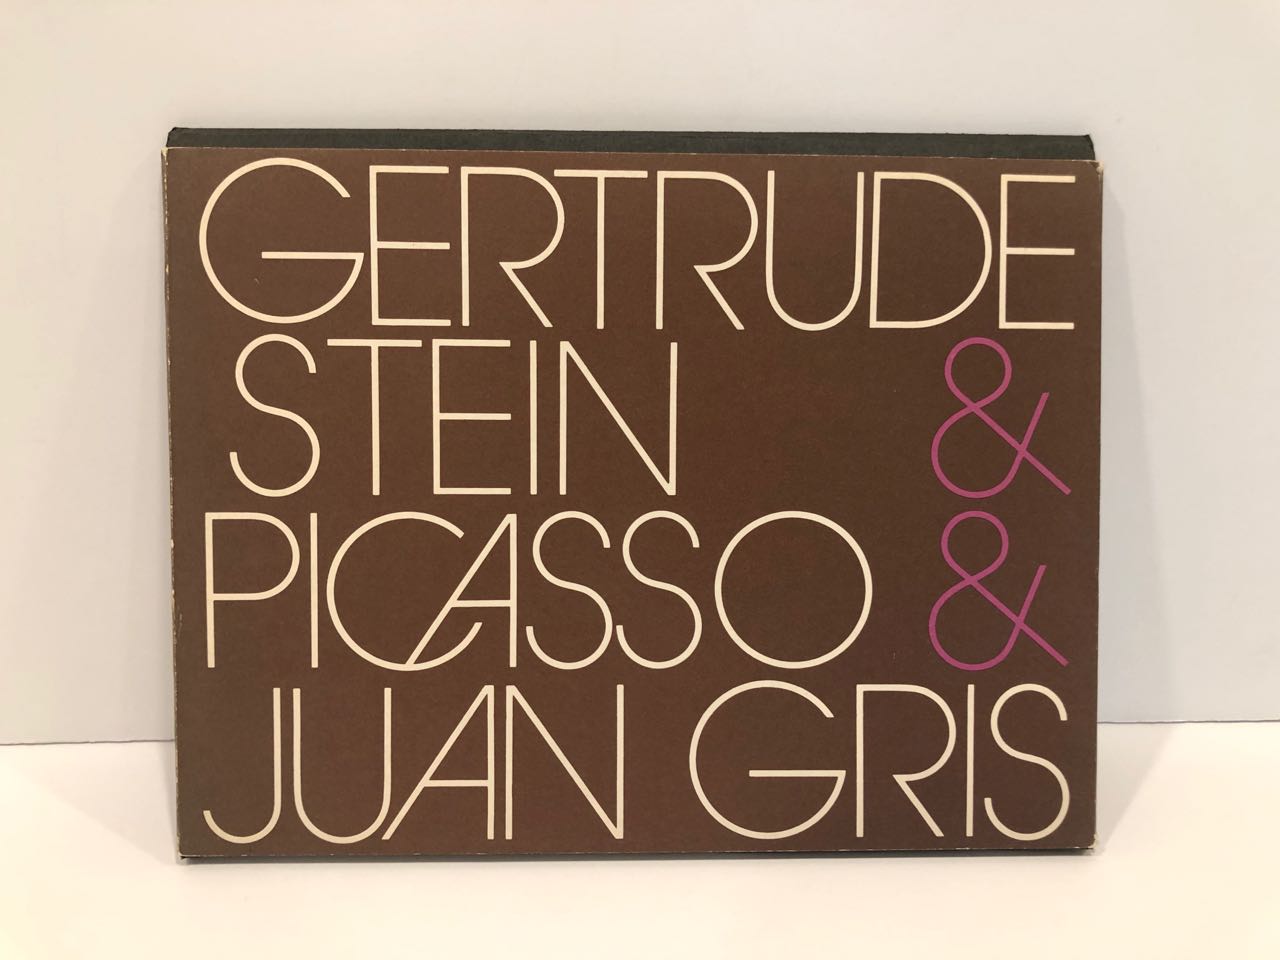 Image for Gertrude Stein & Picasso & Juan Gris